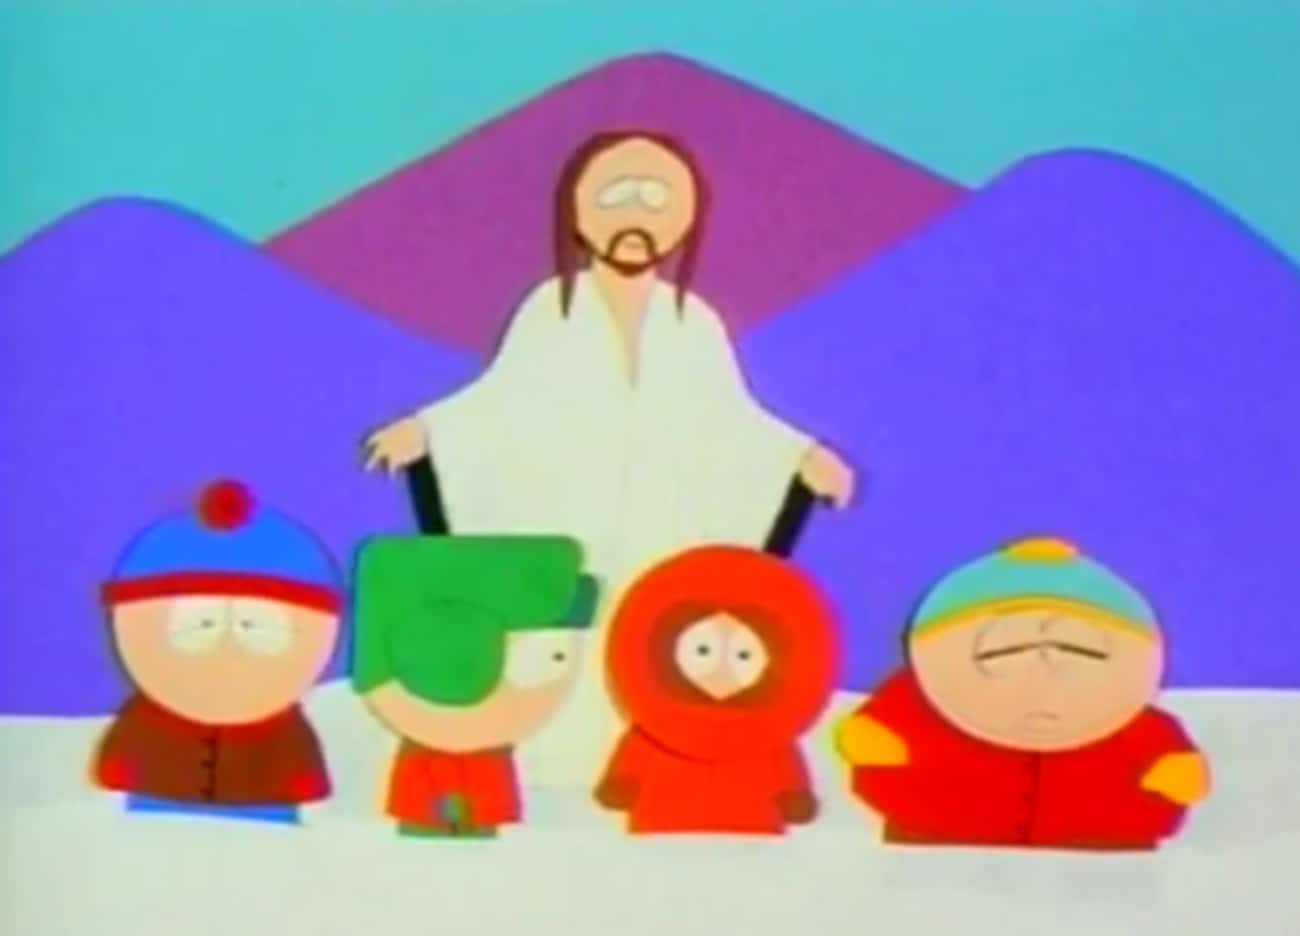 George Clooney Made Hundreds Of VHS Copies Of Matt Stone And Trey Parker’s Animated Short And Gave Them To His Hollywood Friends, Eventually Leading To ‘South Park’